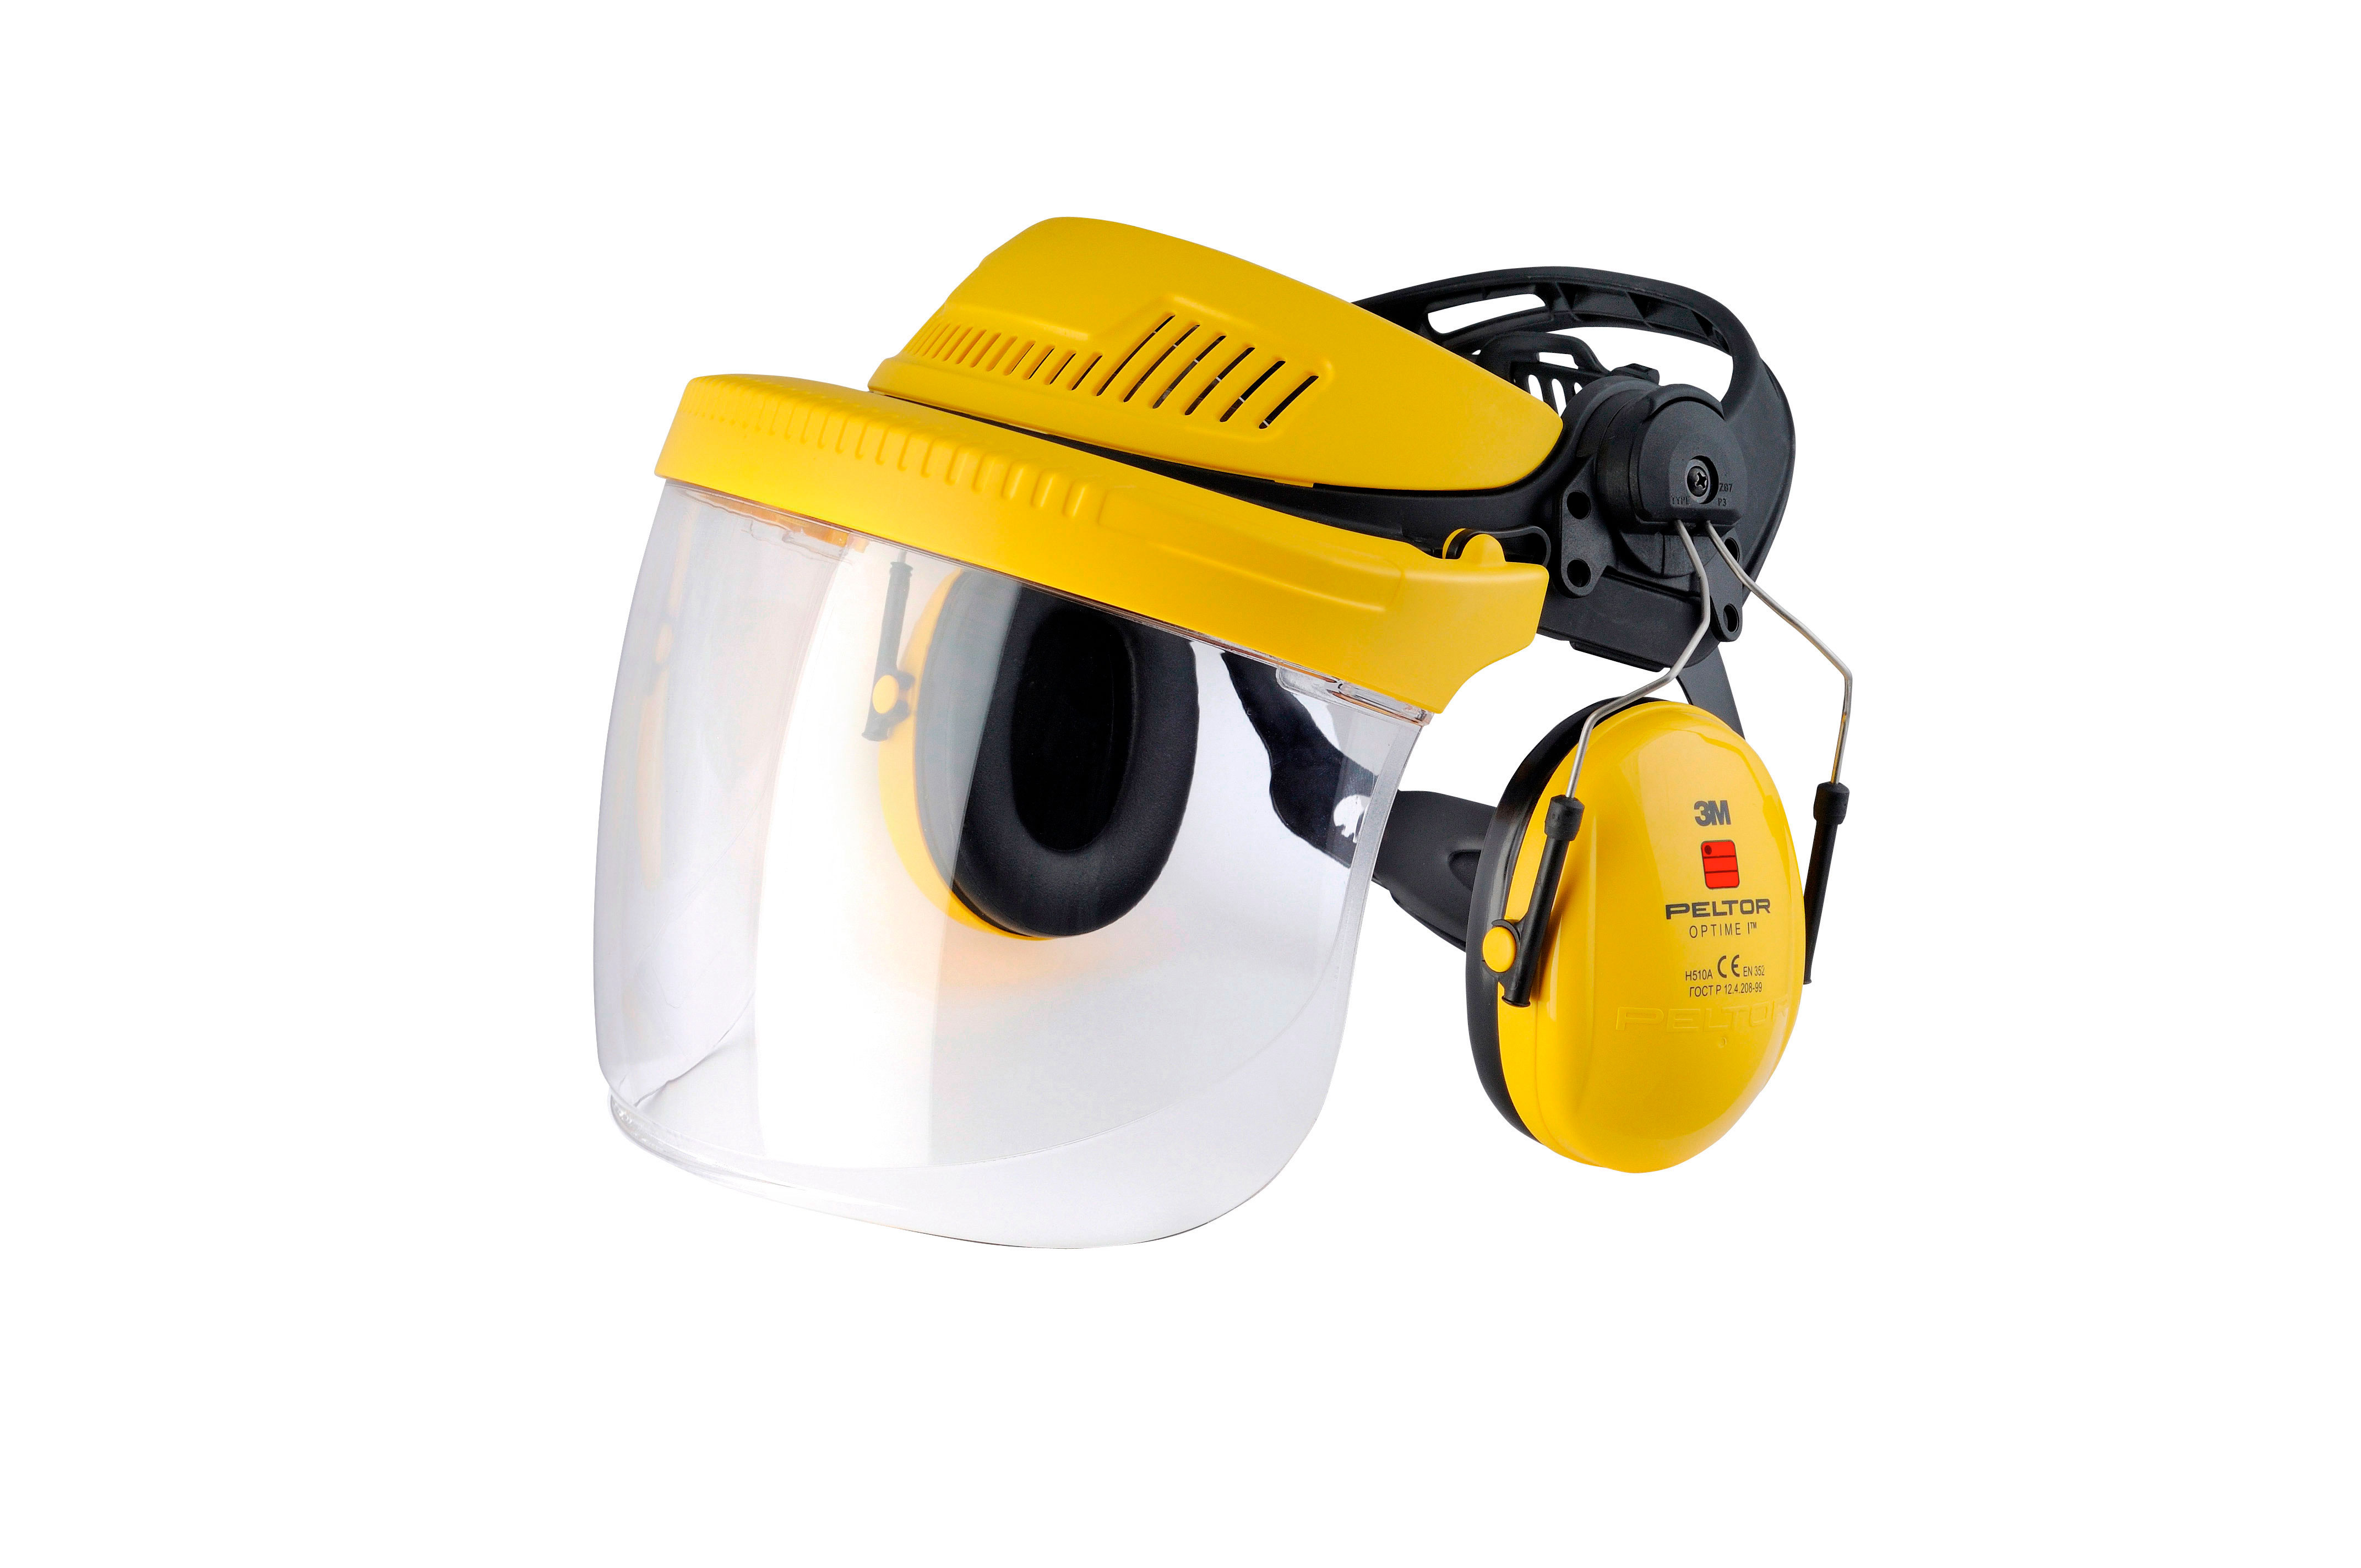 Eye, face and hearing protection. 3M. Goggles mark: EN 166